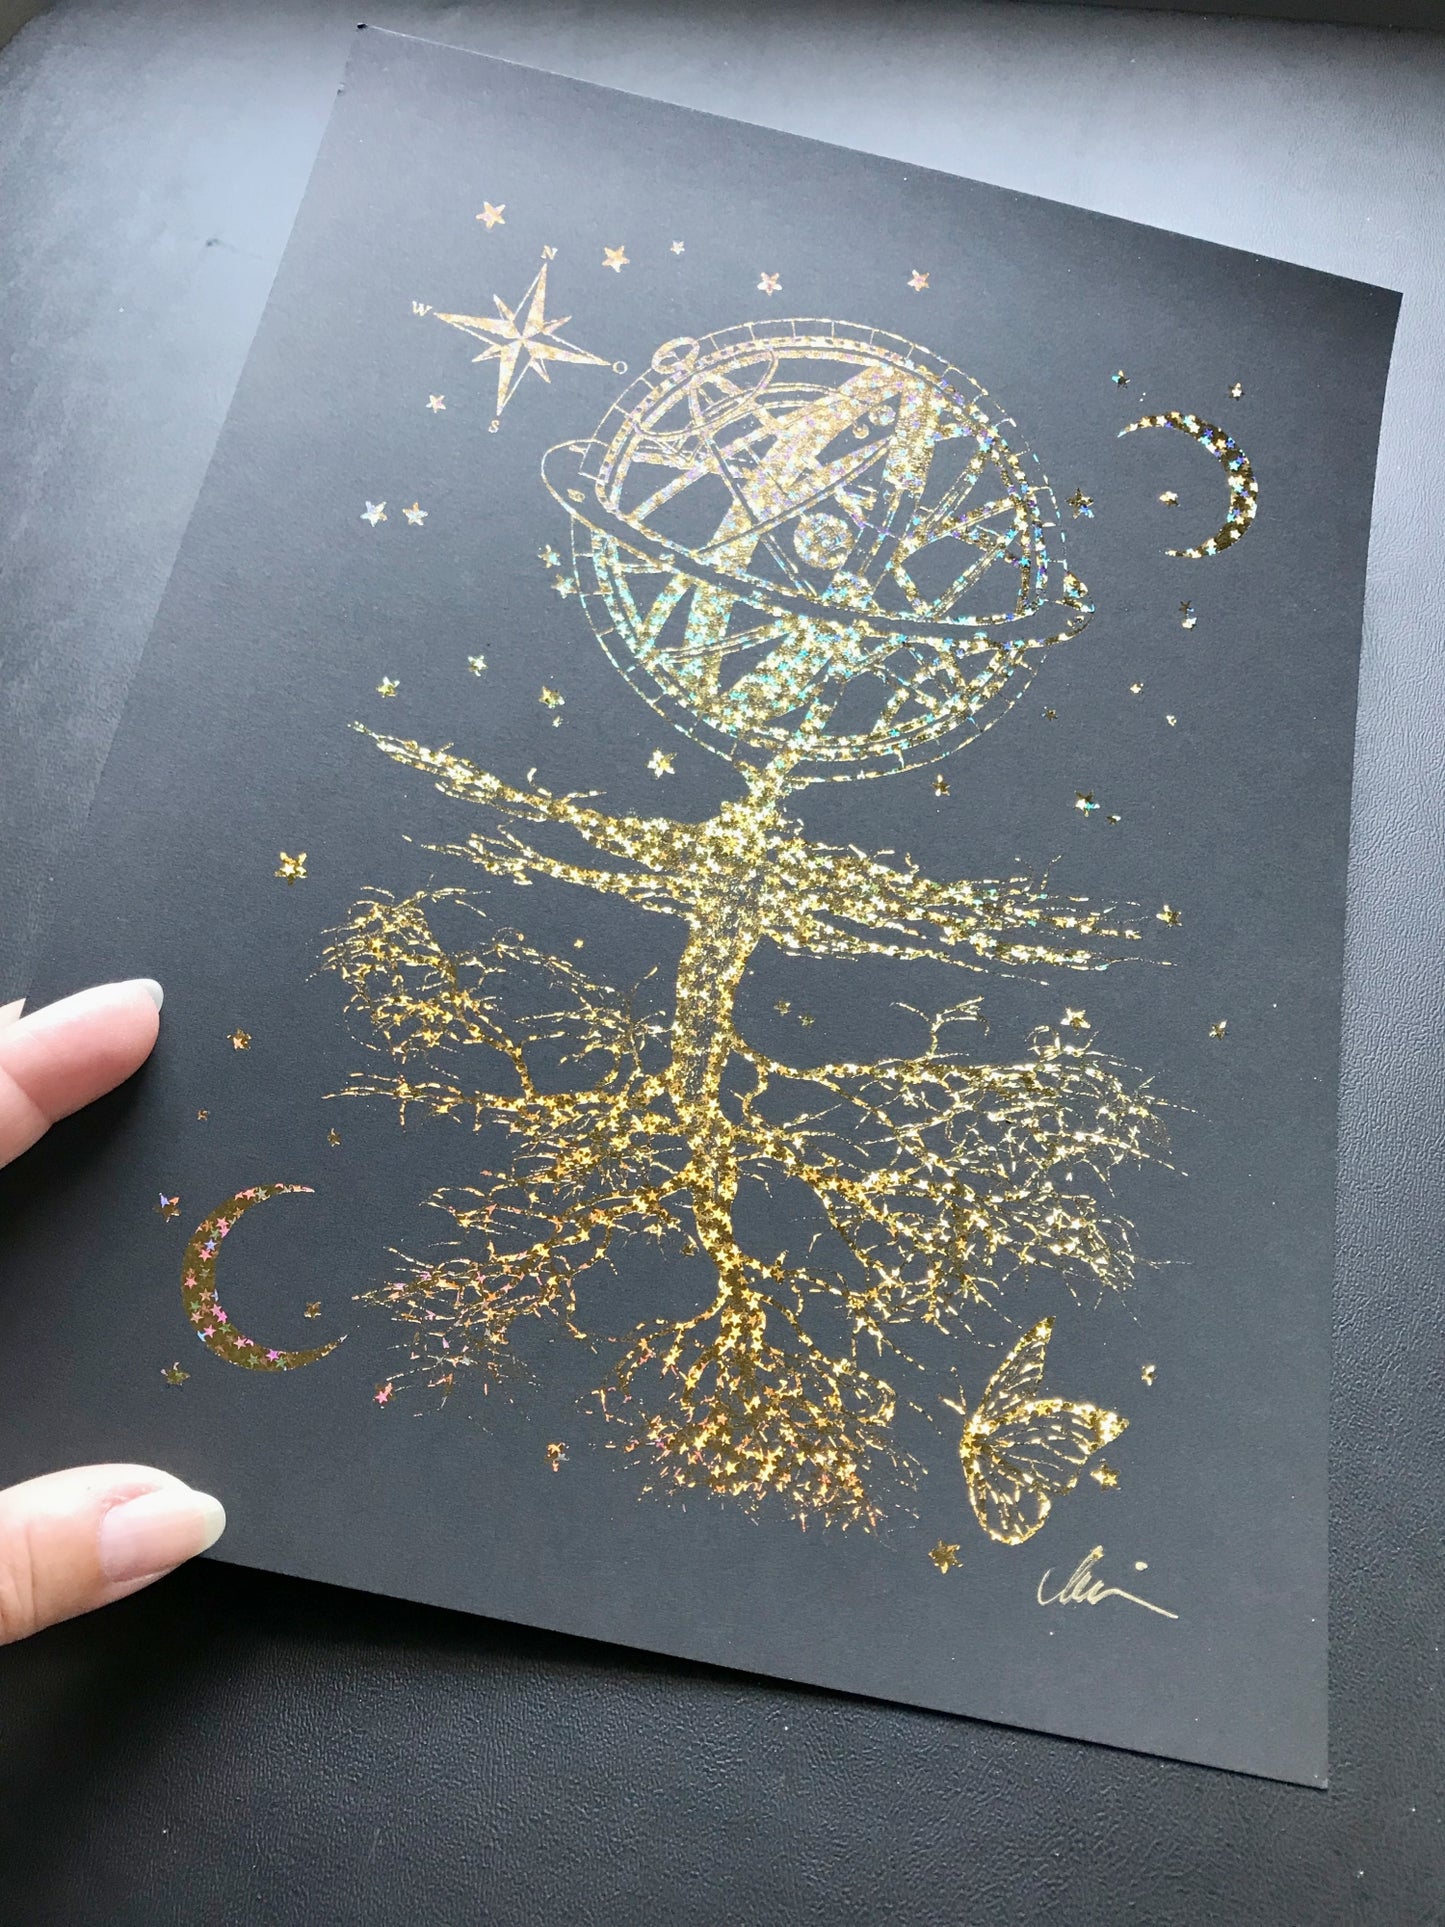 Neverland - signed gold holographic foil art print by Marianna Mills - details